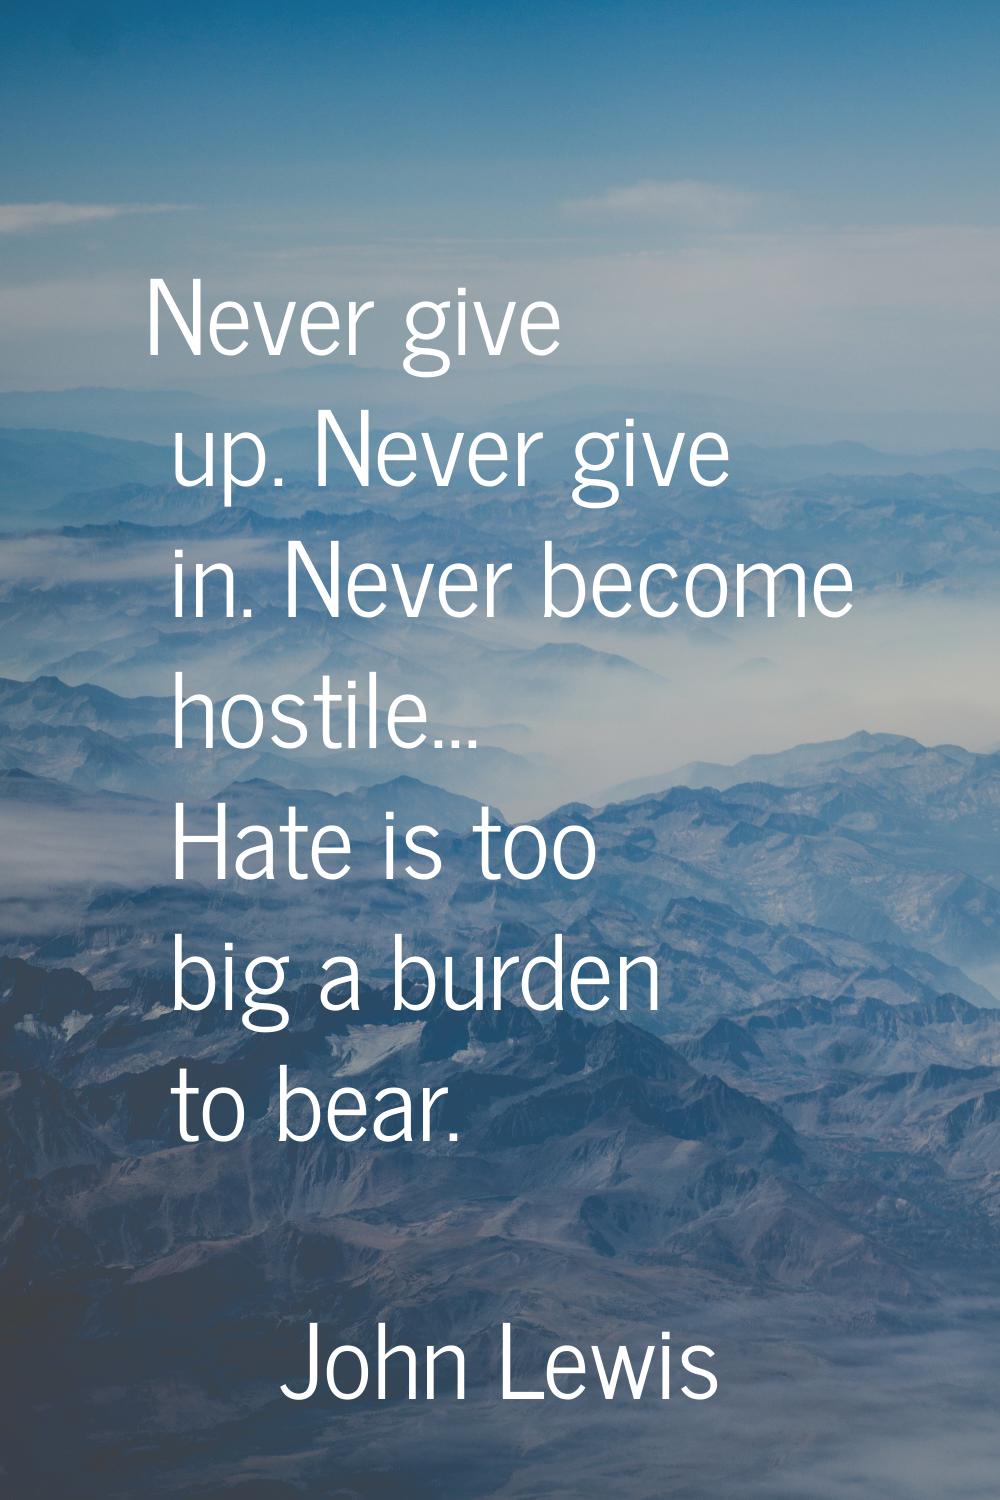 Never give up. Never give in. Never become hostile... Hate is too big a burden to bear.